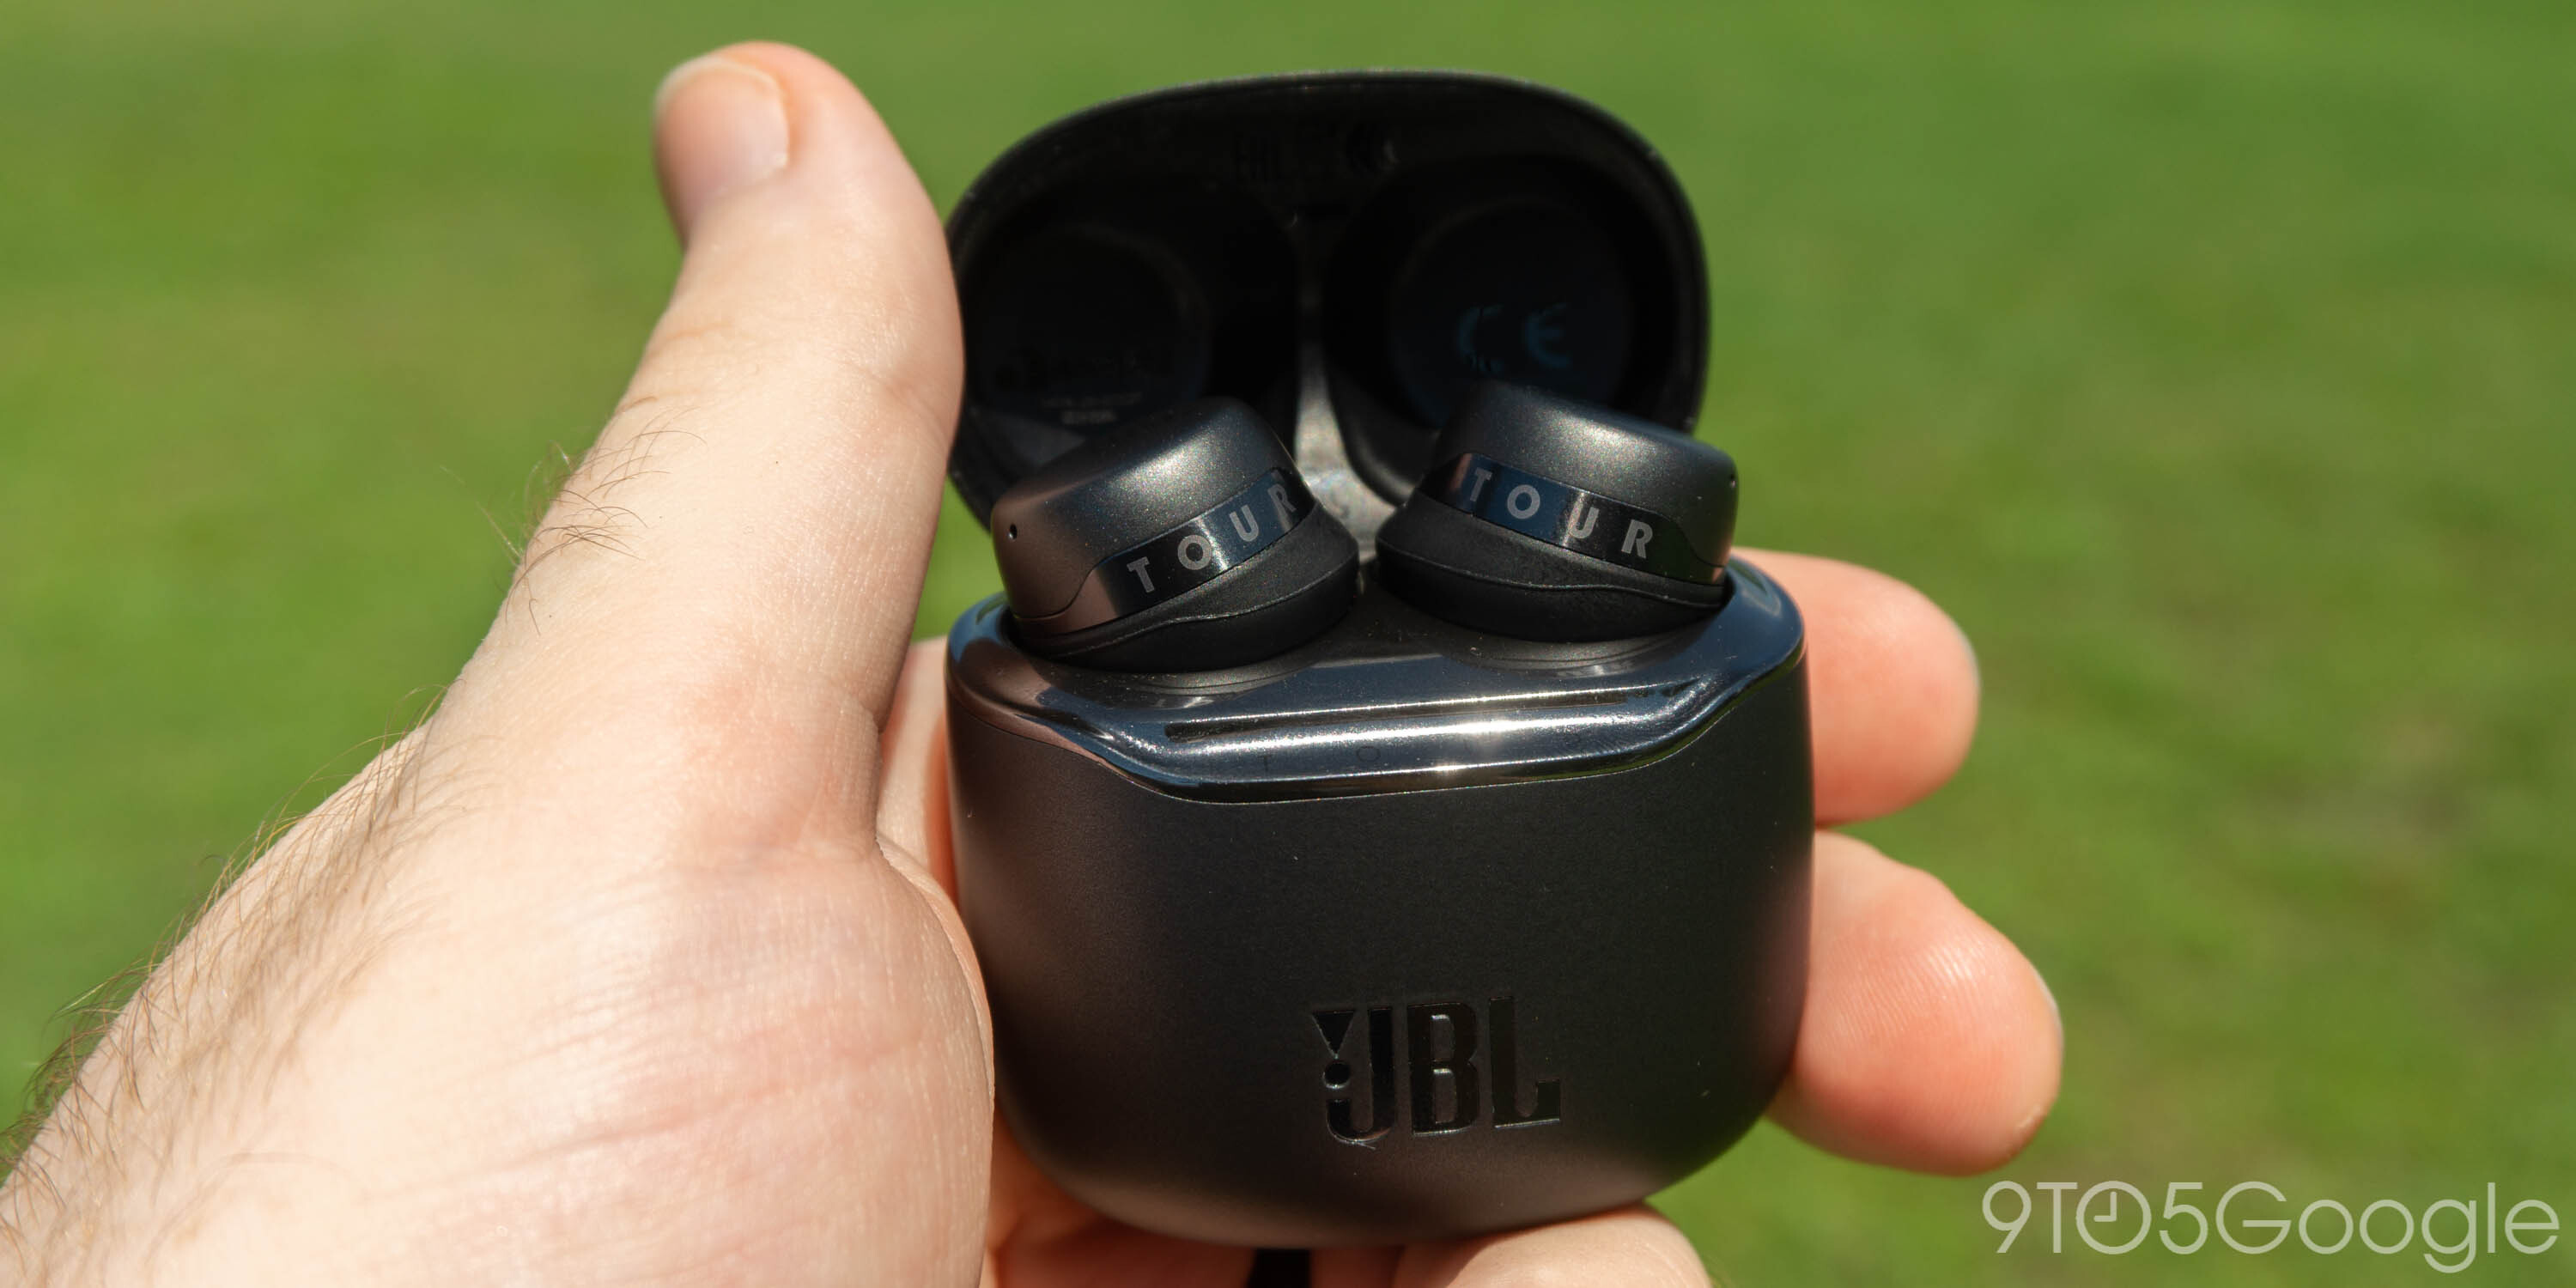 JBL Tour Pro+ review: $200 noise-canceling Assistant buds - 9to5Google